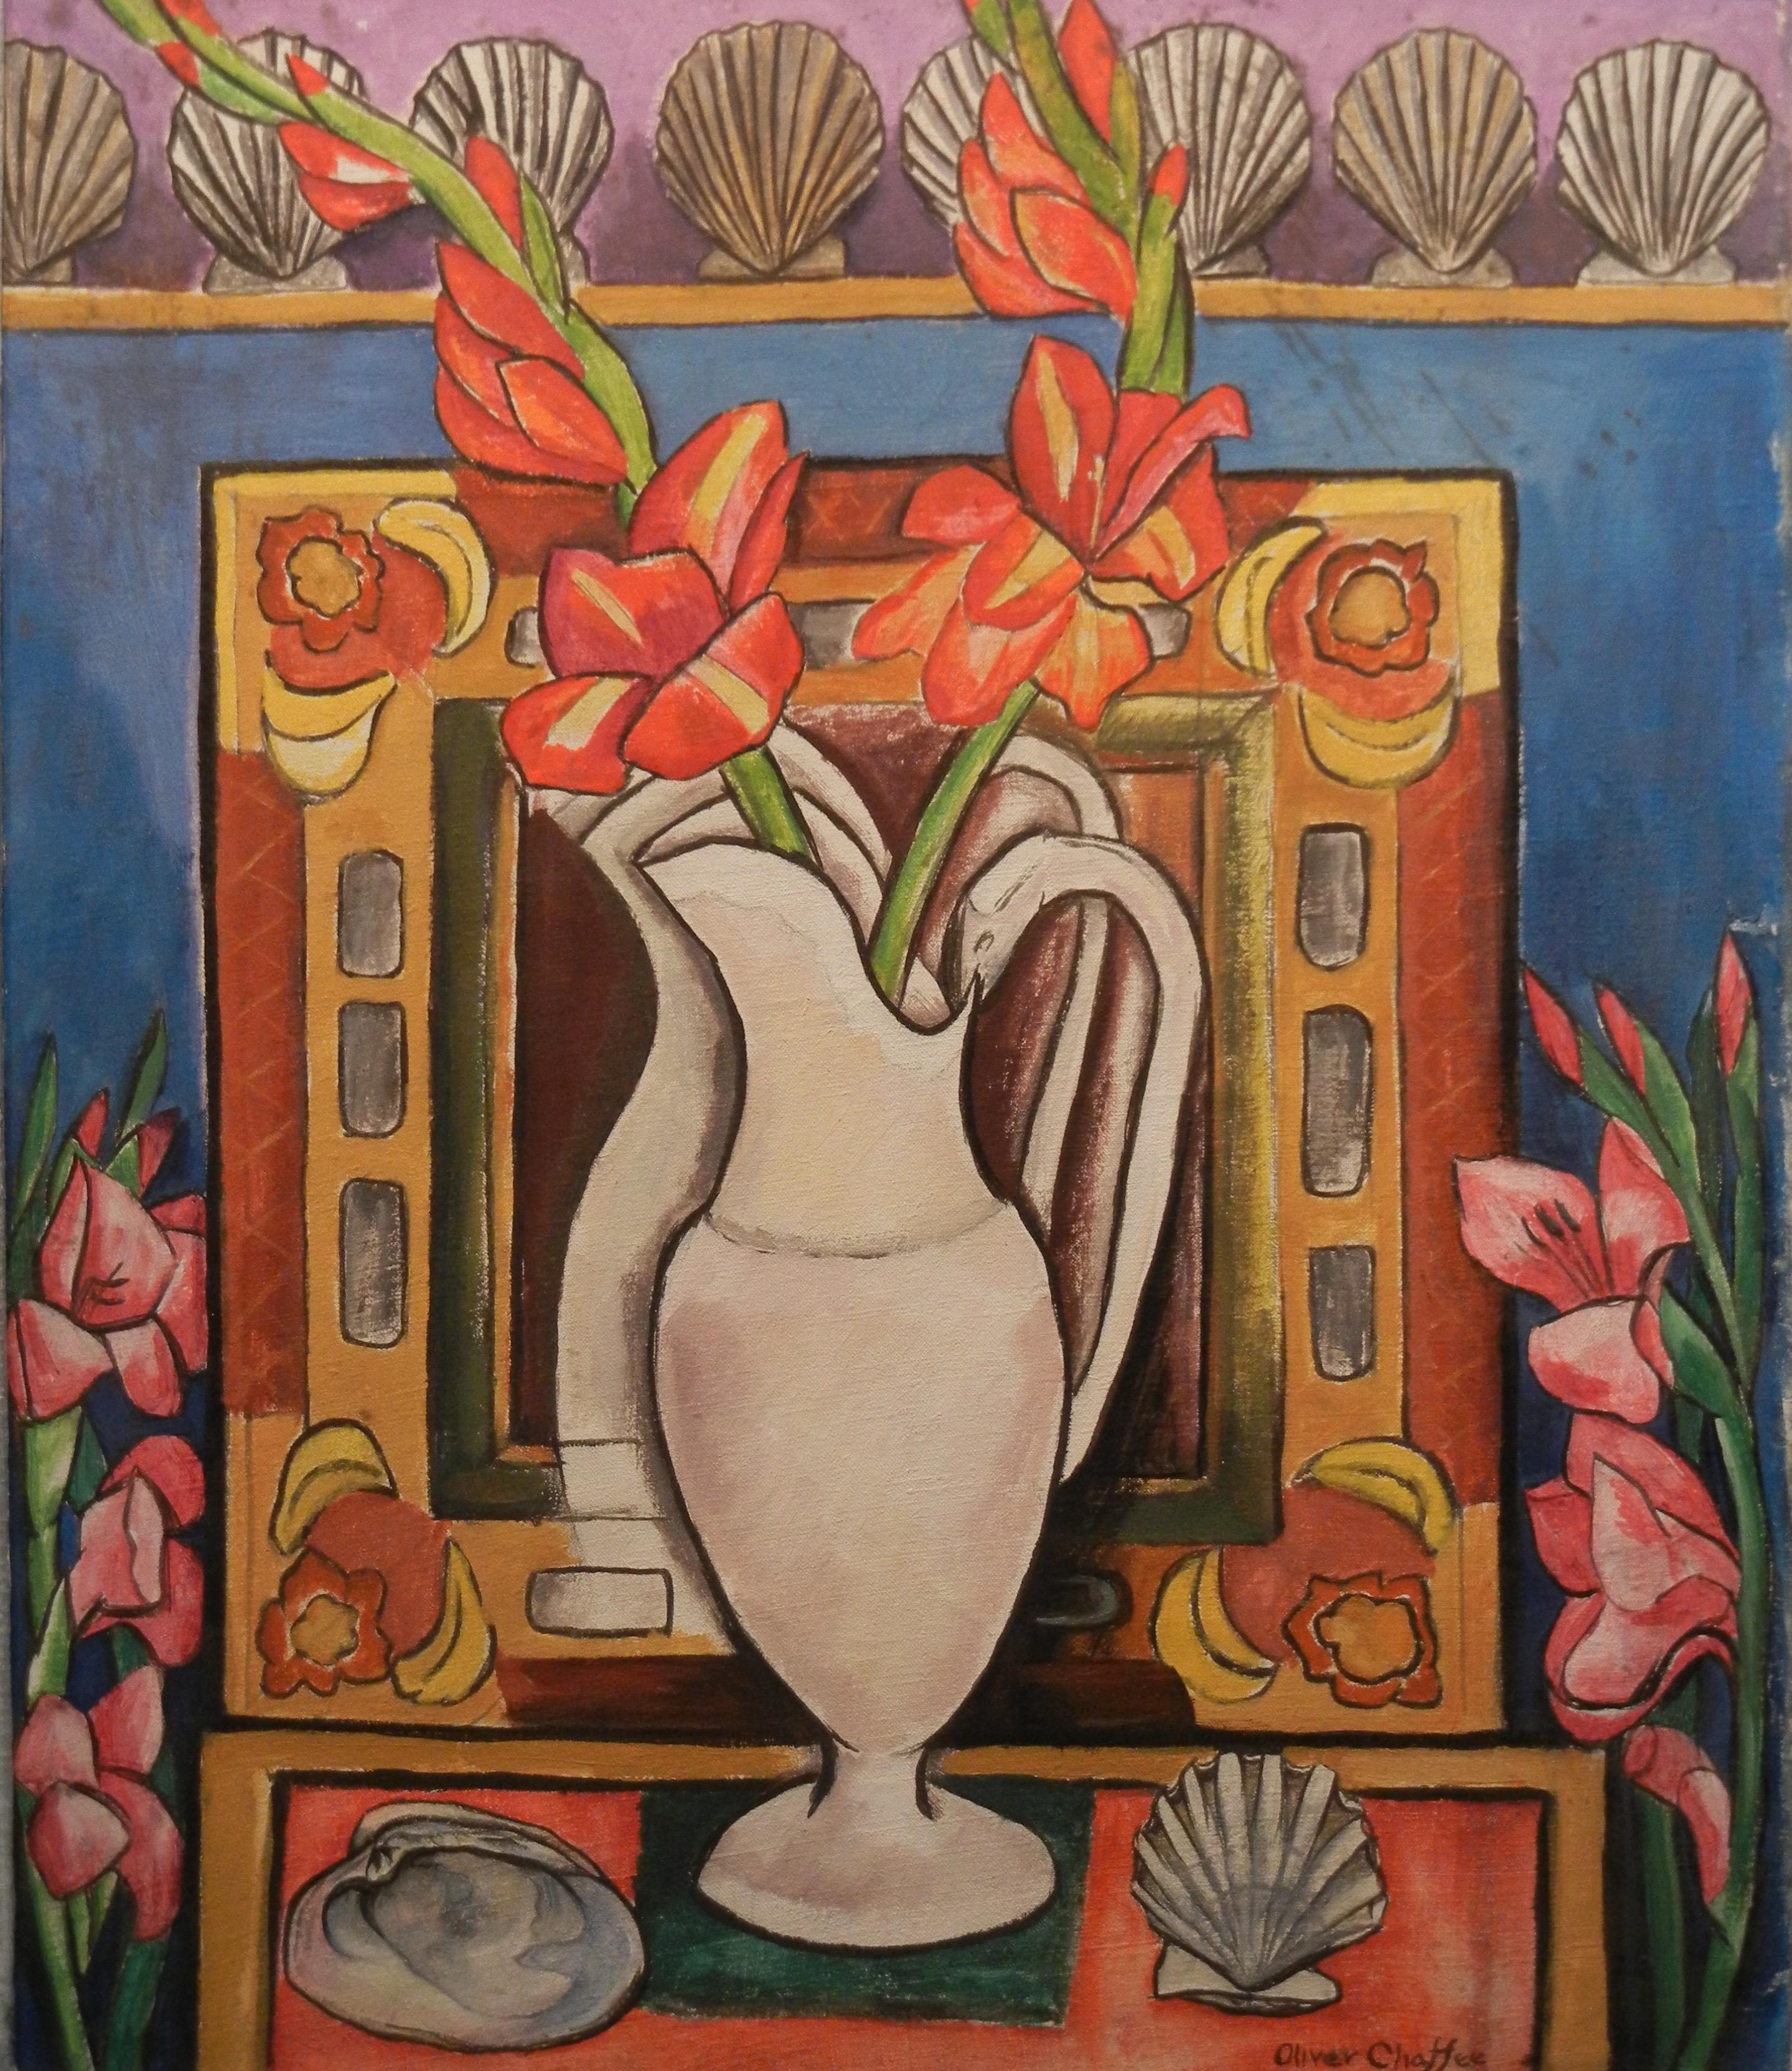 Shells and Flowers - Painting by Oliver Chaffee